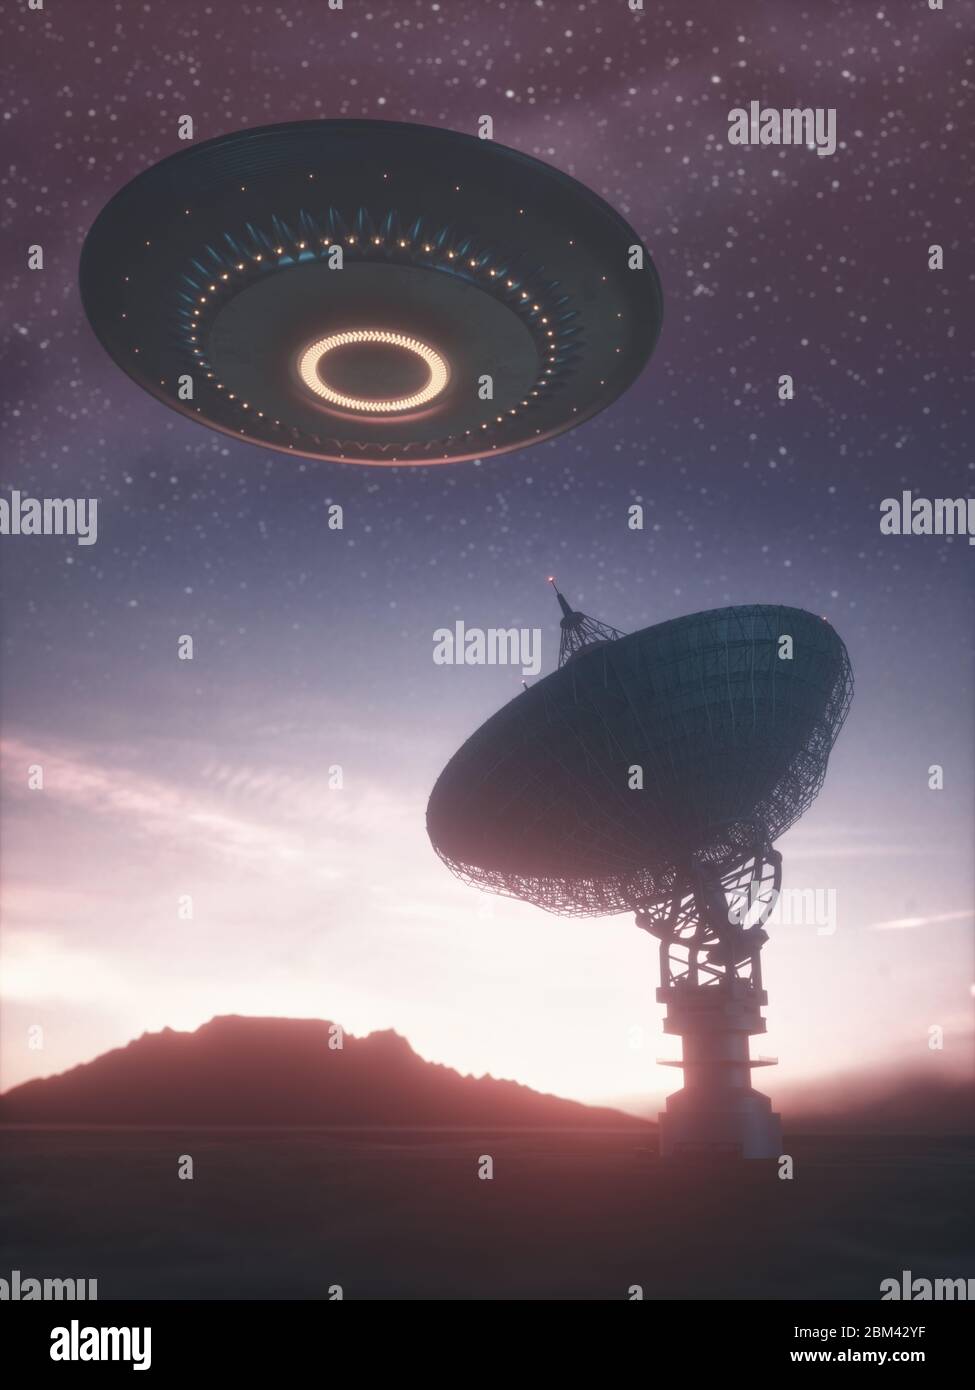 Huge antenna dish for communication and signal reception out of the planet Earth. Observatory searching for radio signal in space at sunset. Stock Photo